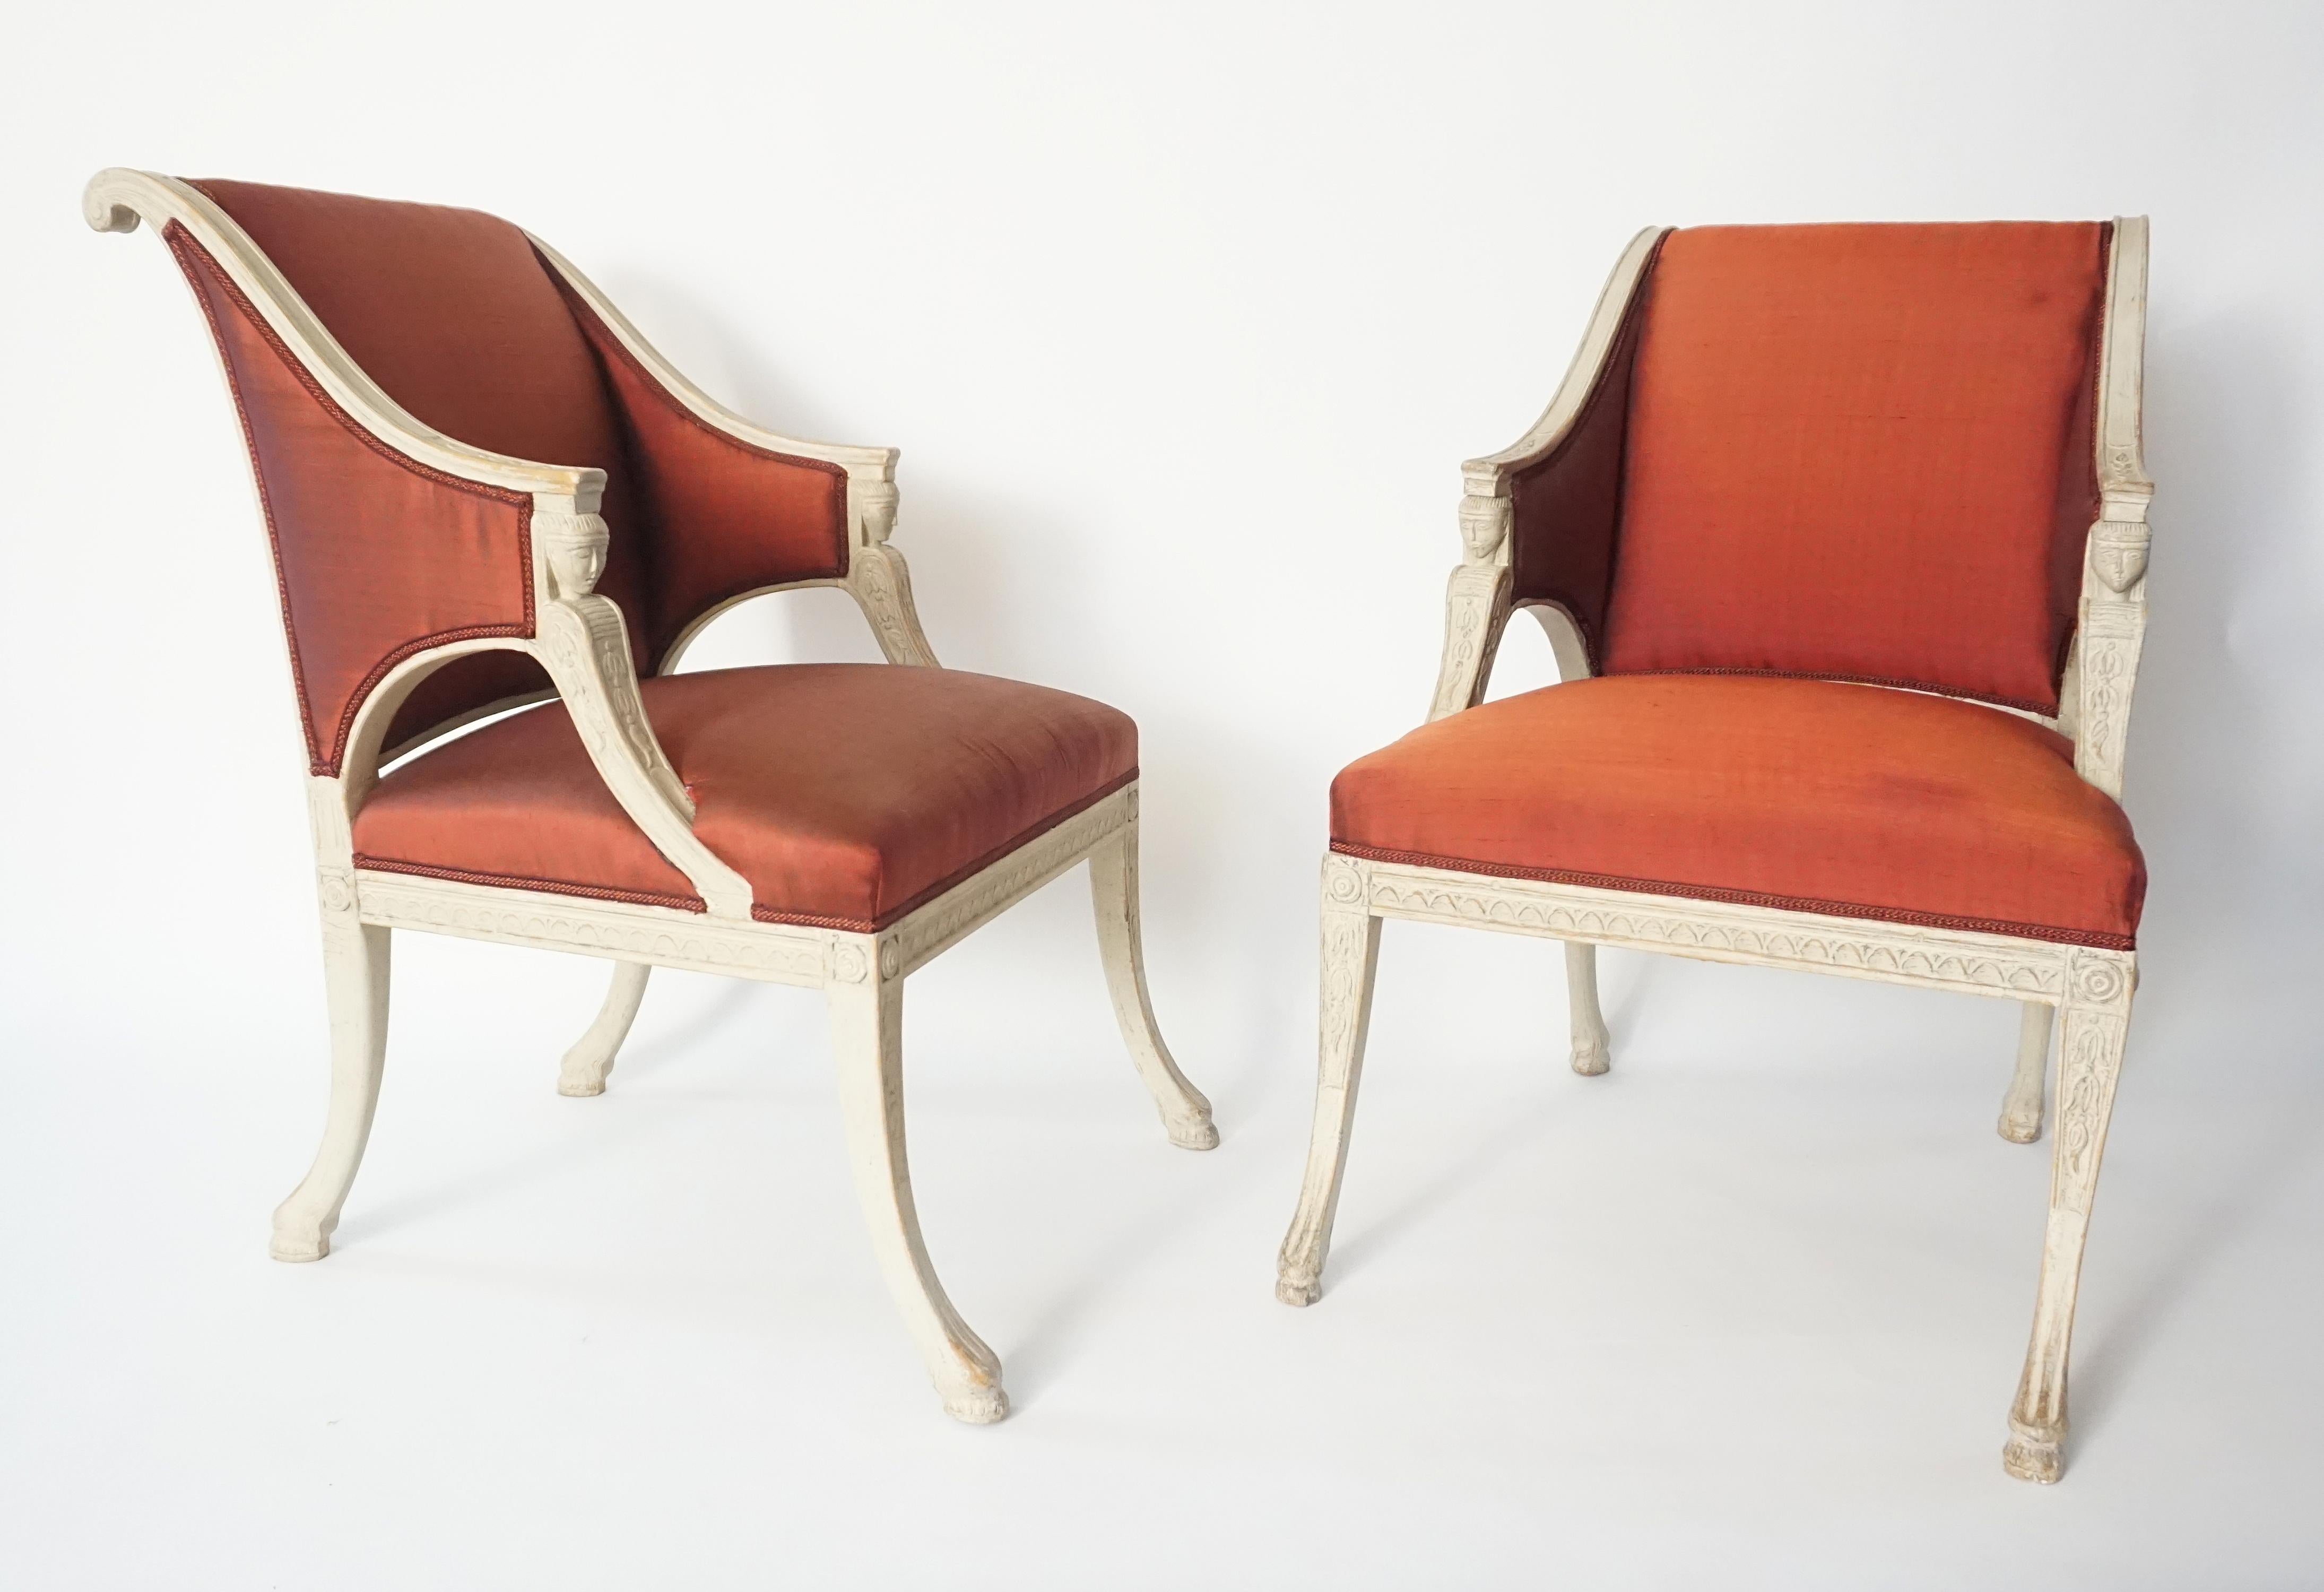 Rare and exceptional pair of Swedish Gustavian period and style armchairs by Royal Court appointed chair-maker Ephraim Ståhl (b. 1768 - d. 1820) in original paint; the scrolled and upholstered arched backs issuing abbreviated sloping arms ending in